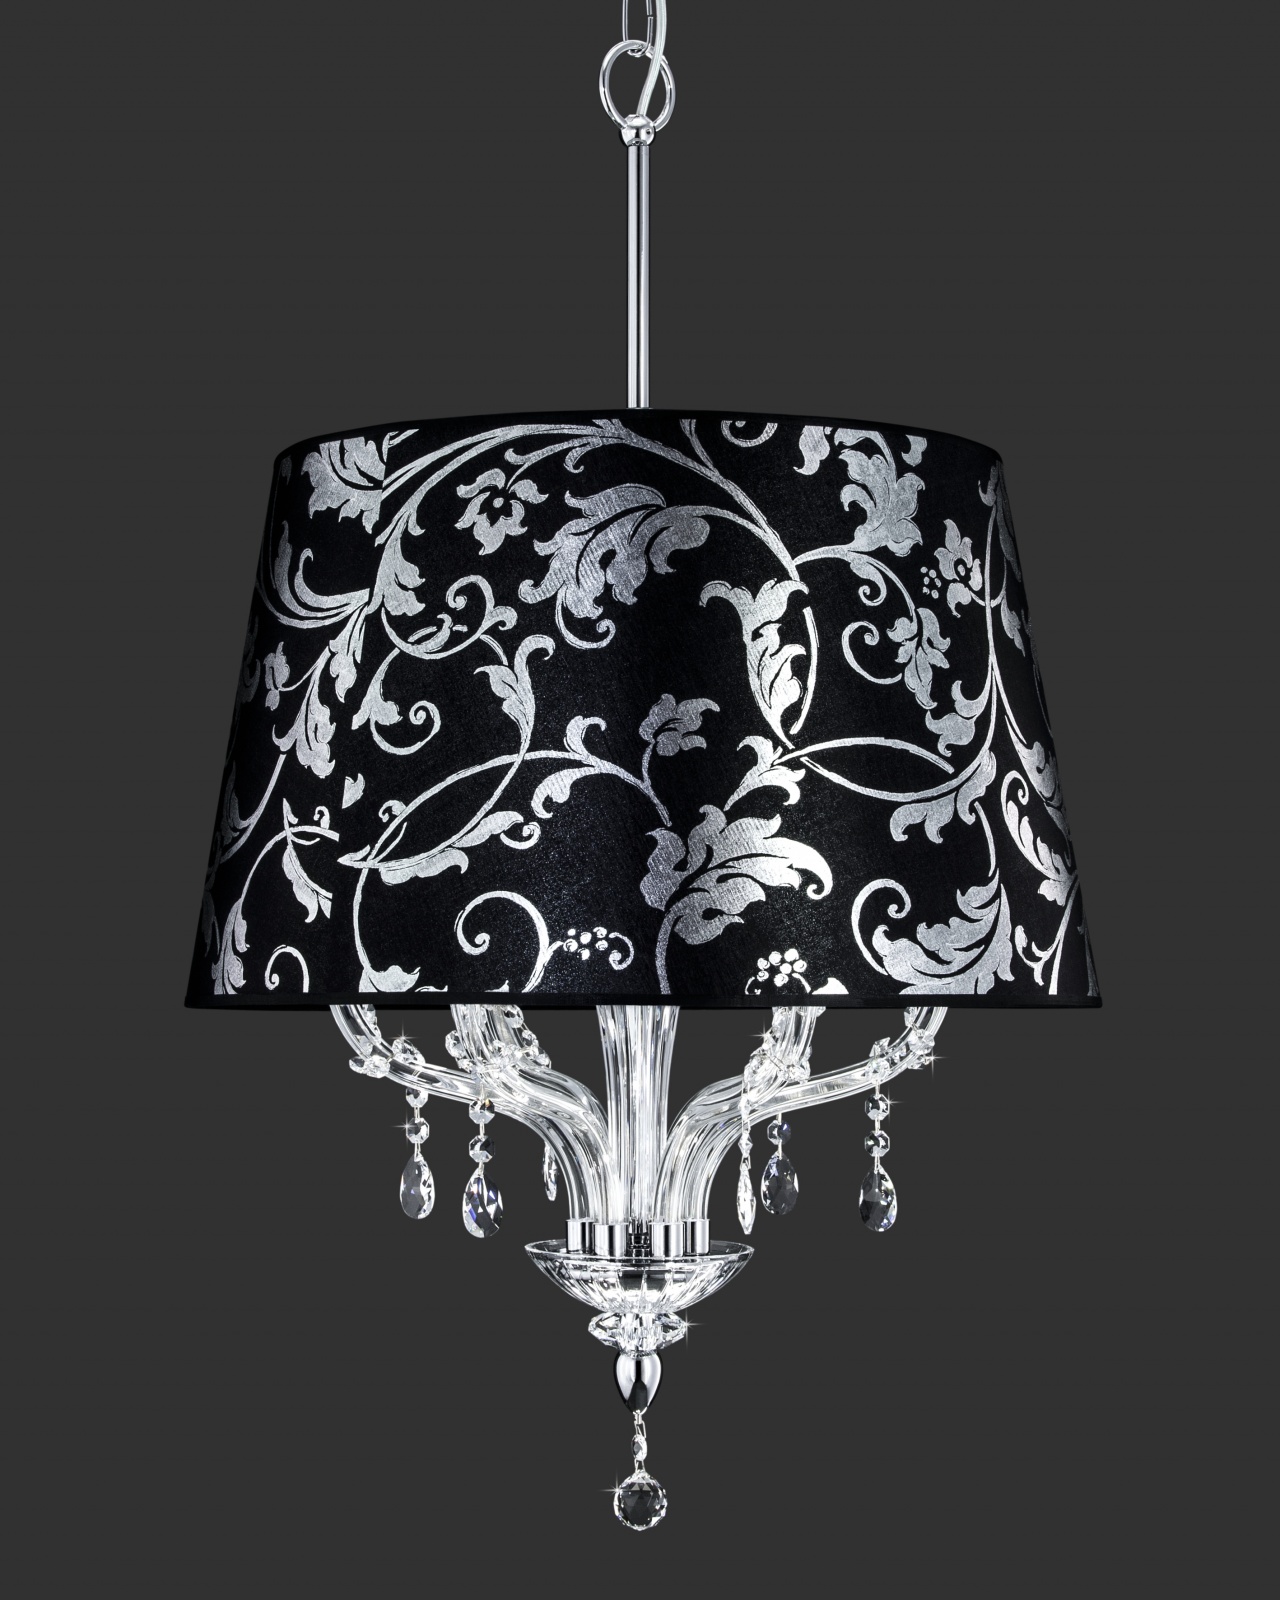 New chandelier Sp6 for Leonie collection